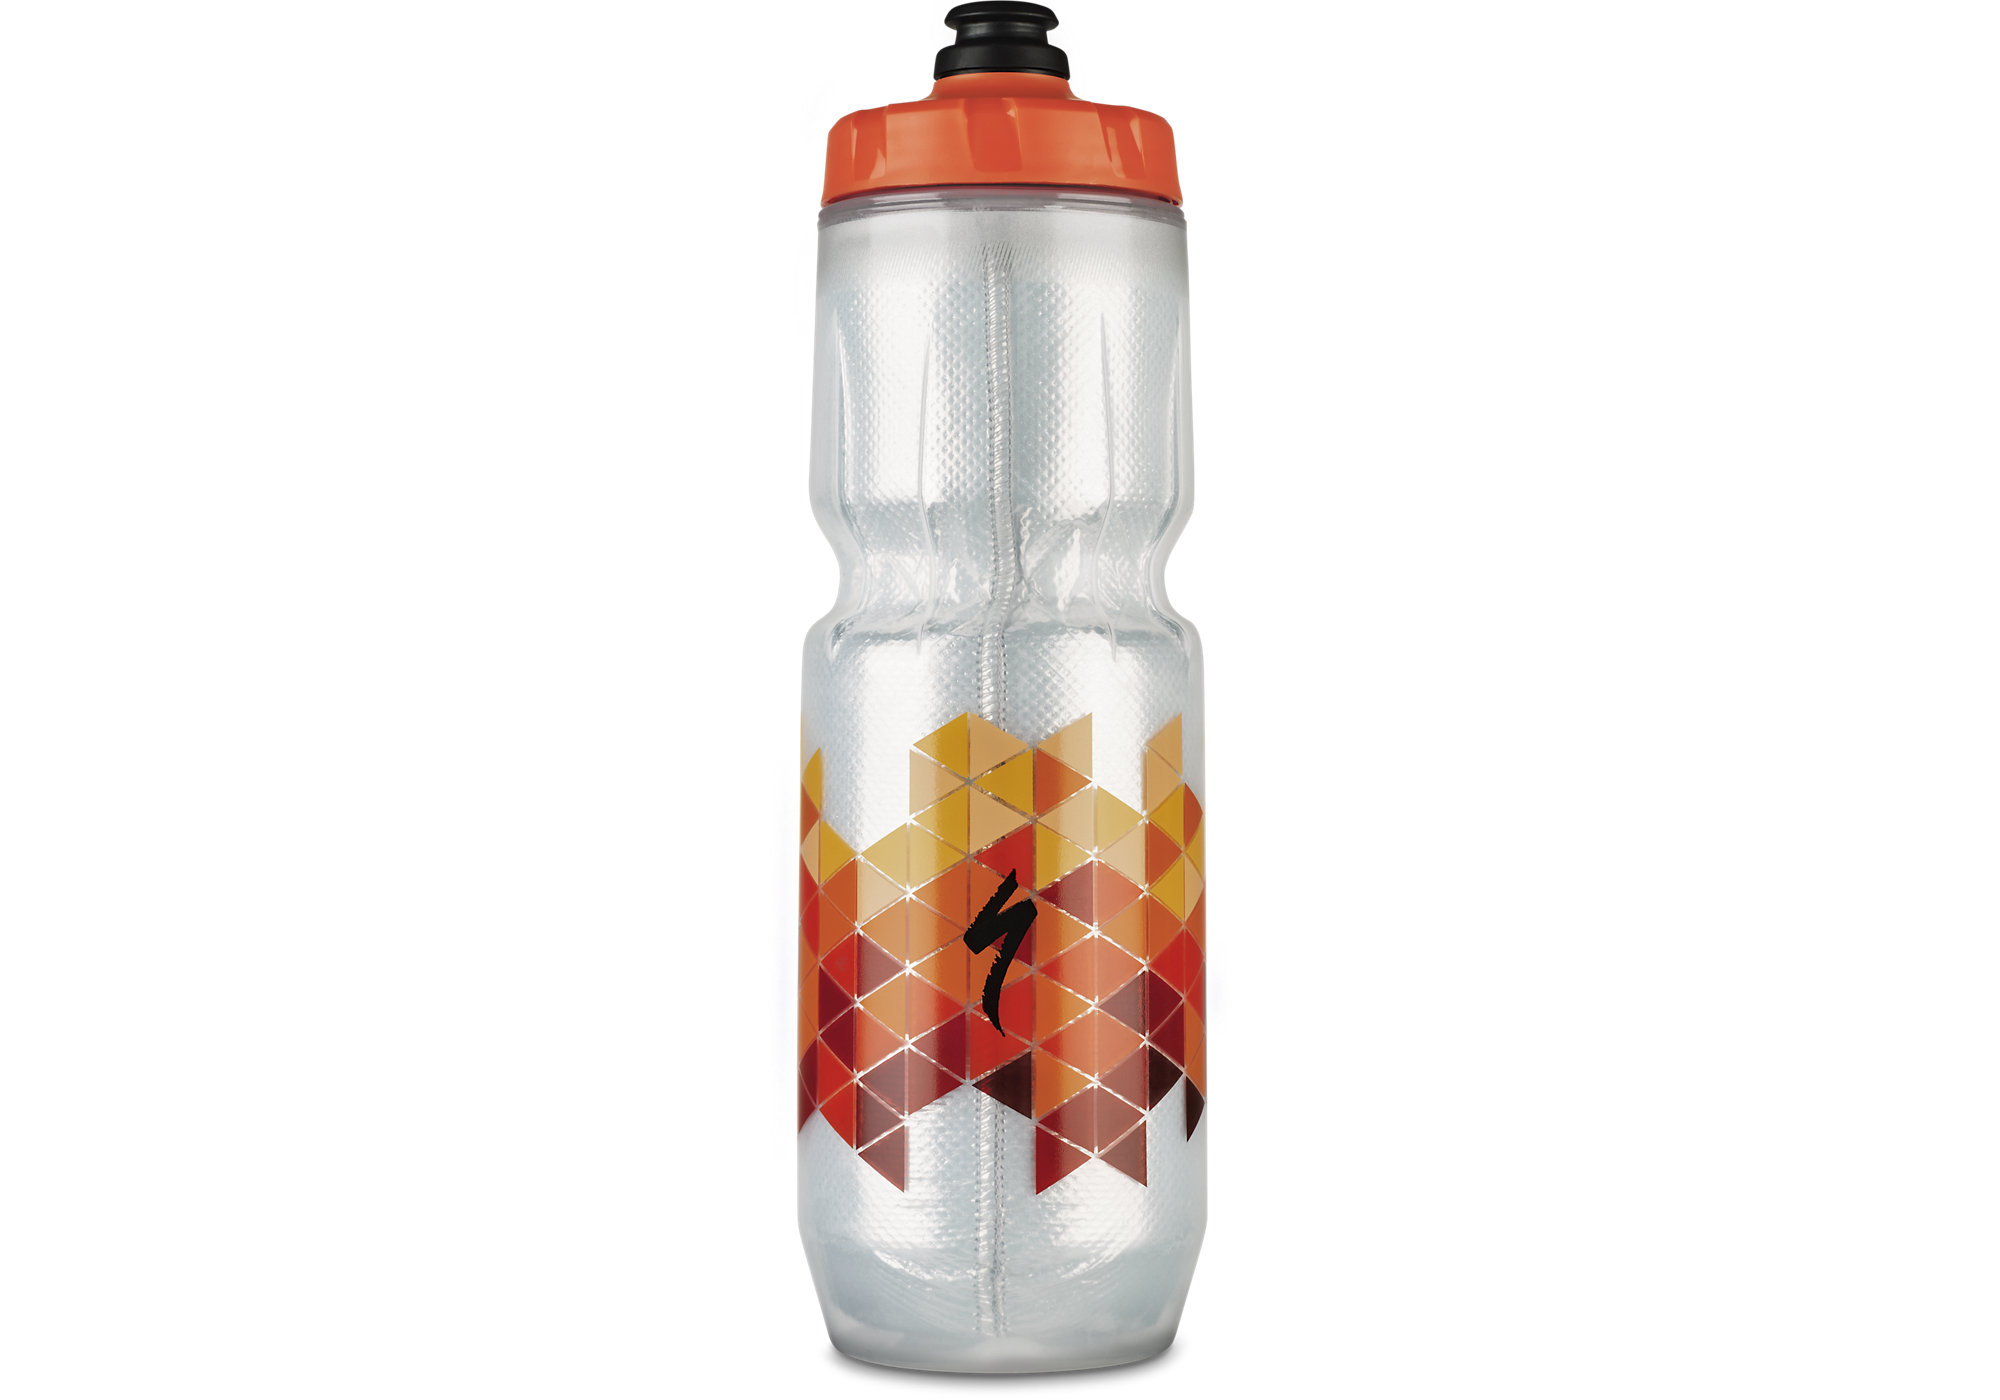 https://www.sefiles.net/images/library/zoom/specialized-purist-insulated-moflo-water-bottle-330353-11.jpg